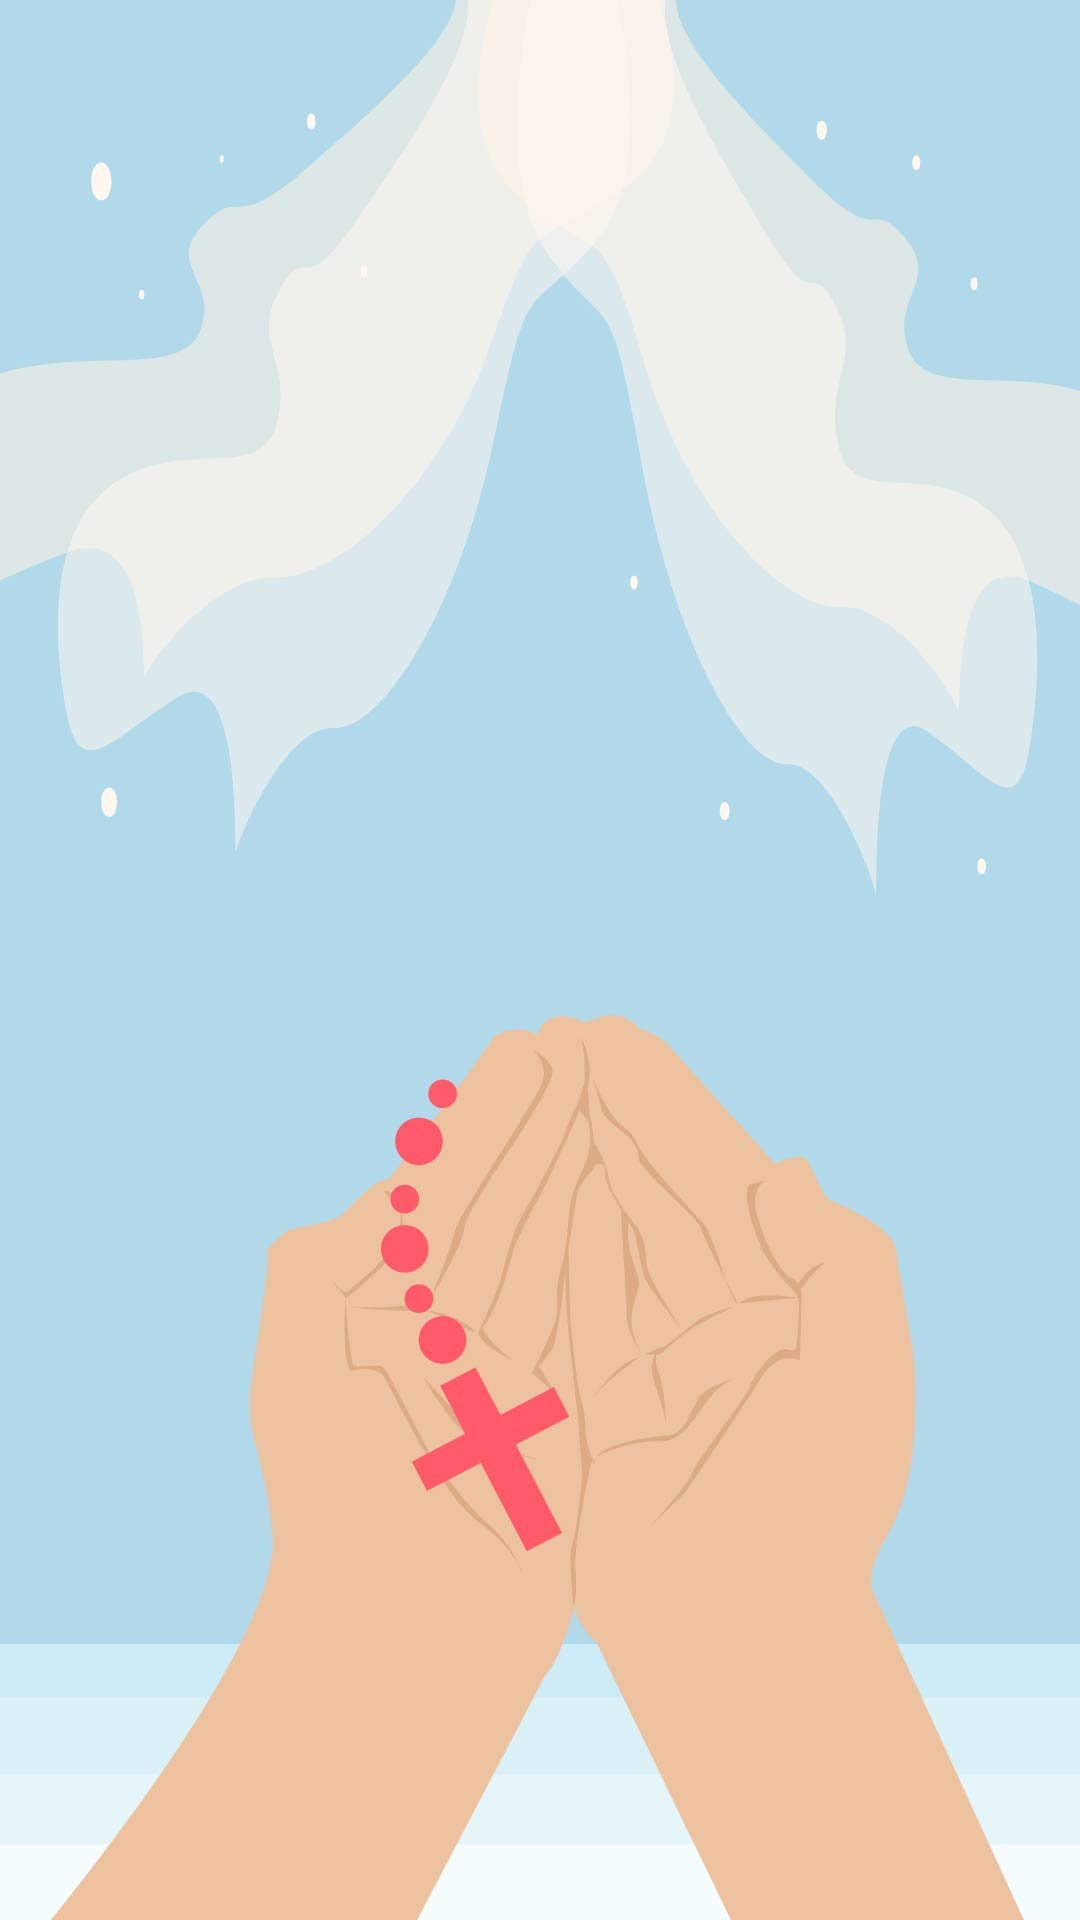 Free National Day of Prayer iPhone Background in PDF, Illustrator, PSD, EPS, SVG, JPG, PNG